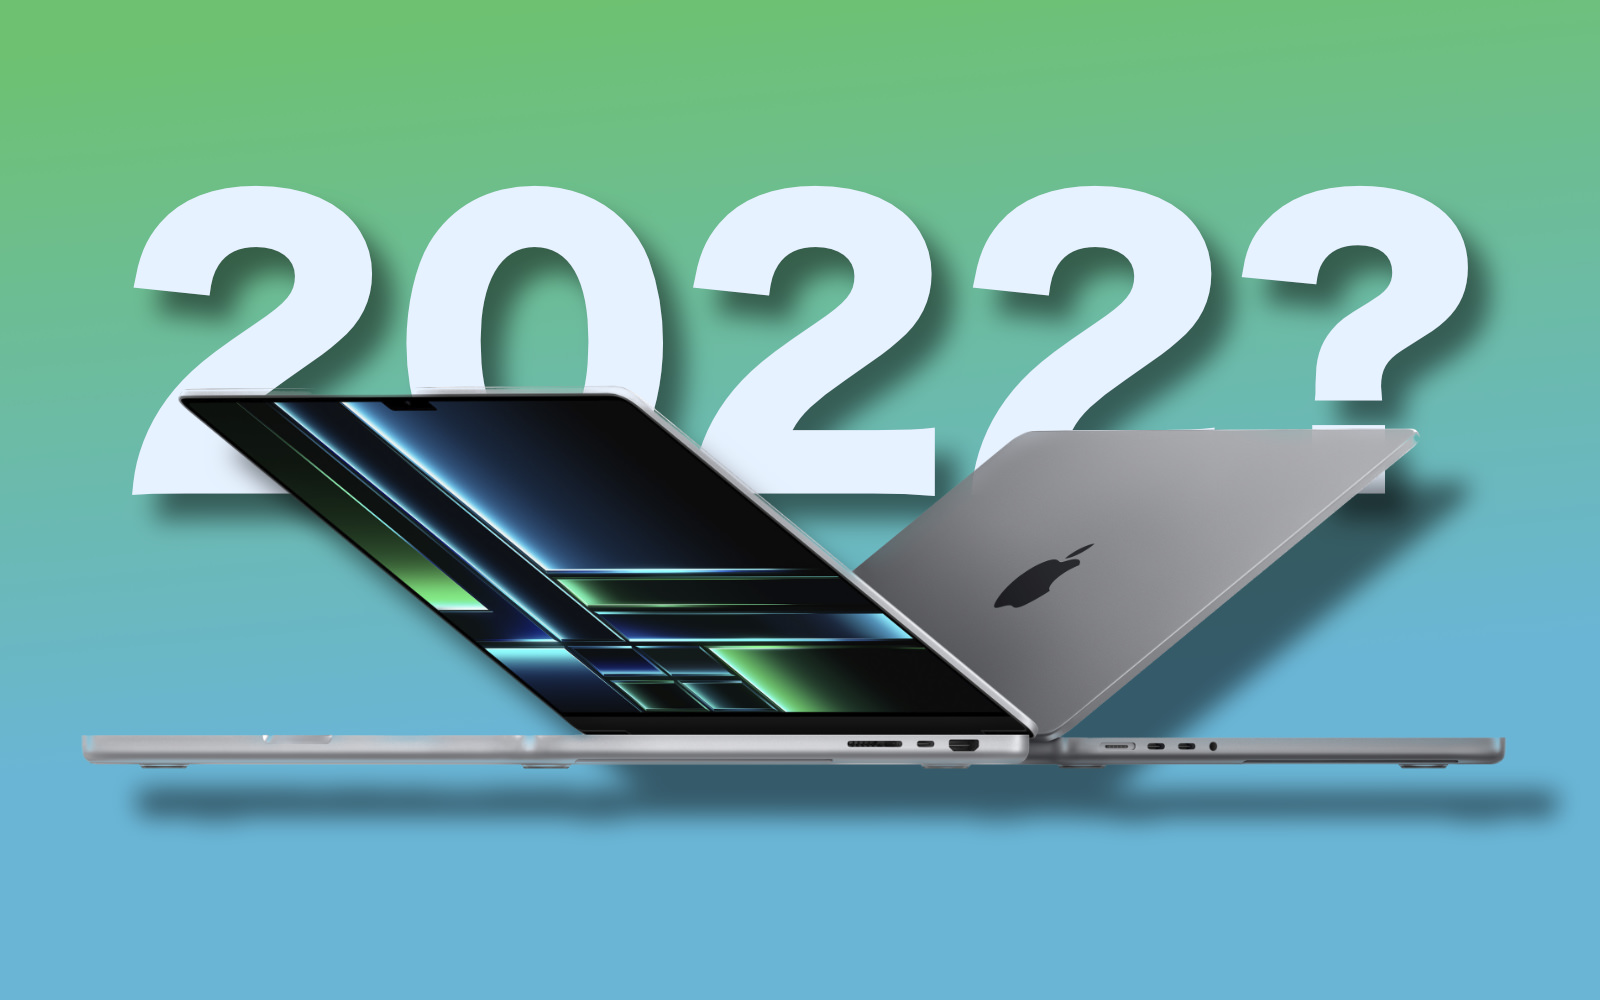 Mbp2023 originally planned for 2022 2